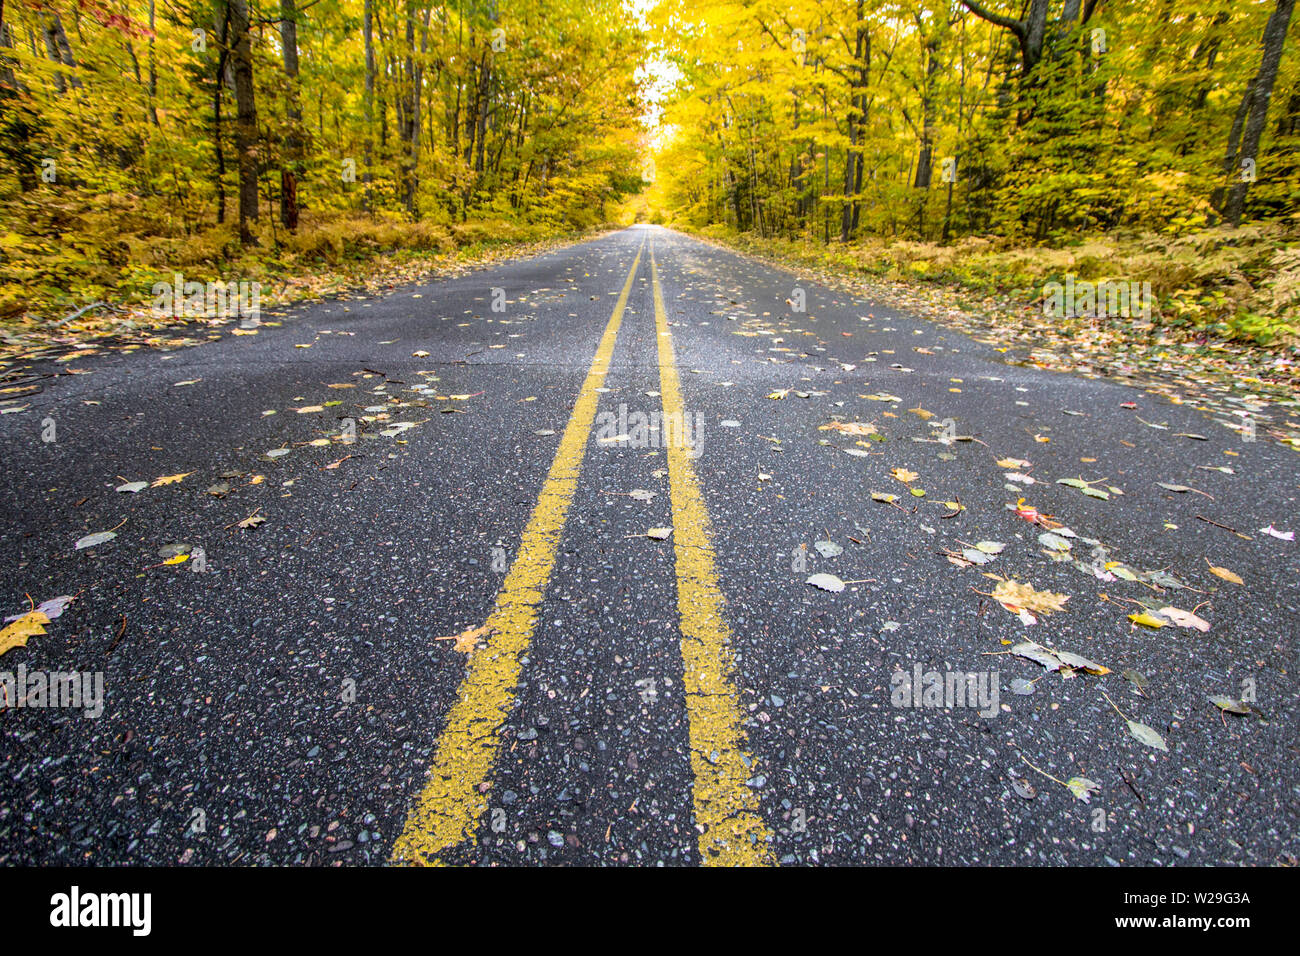 Michigan Fall Color Tour. Wide open rural road through an autumn forest ablaze with fall color Stock Photo